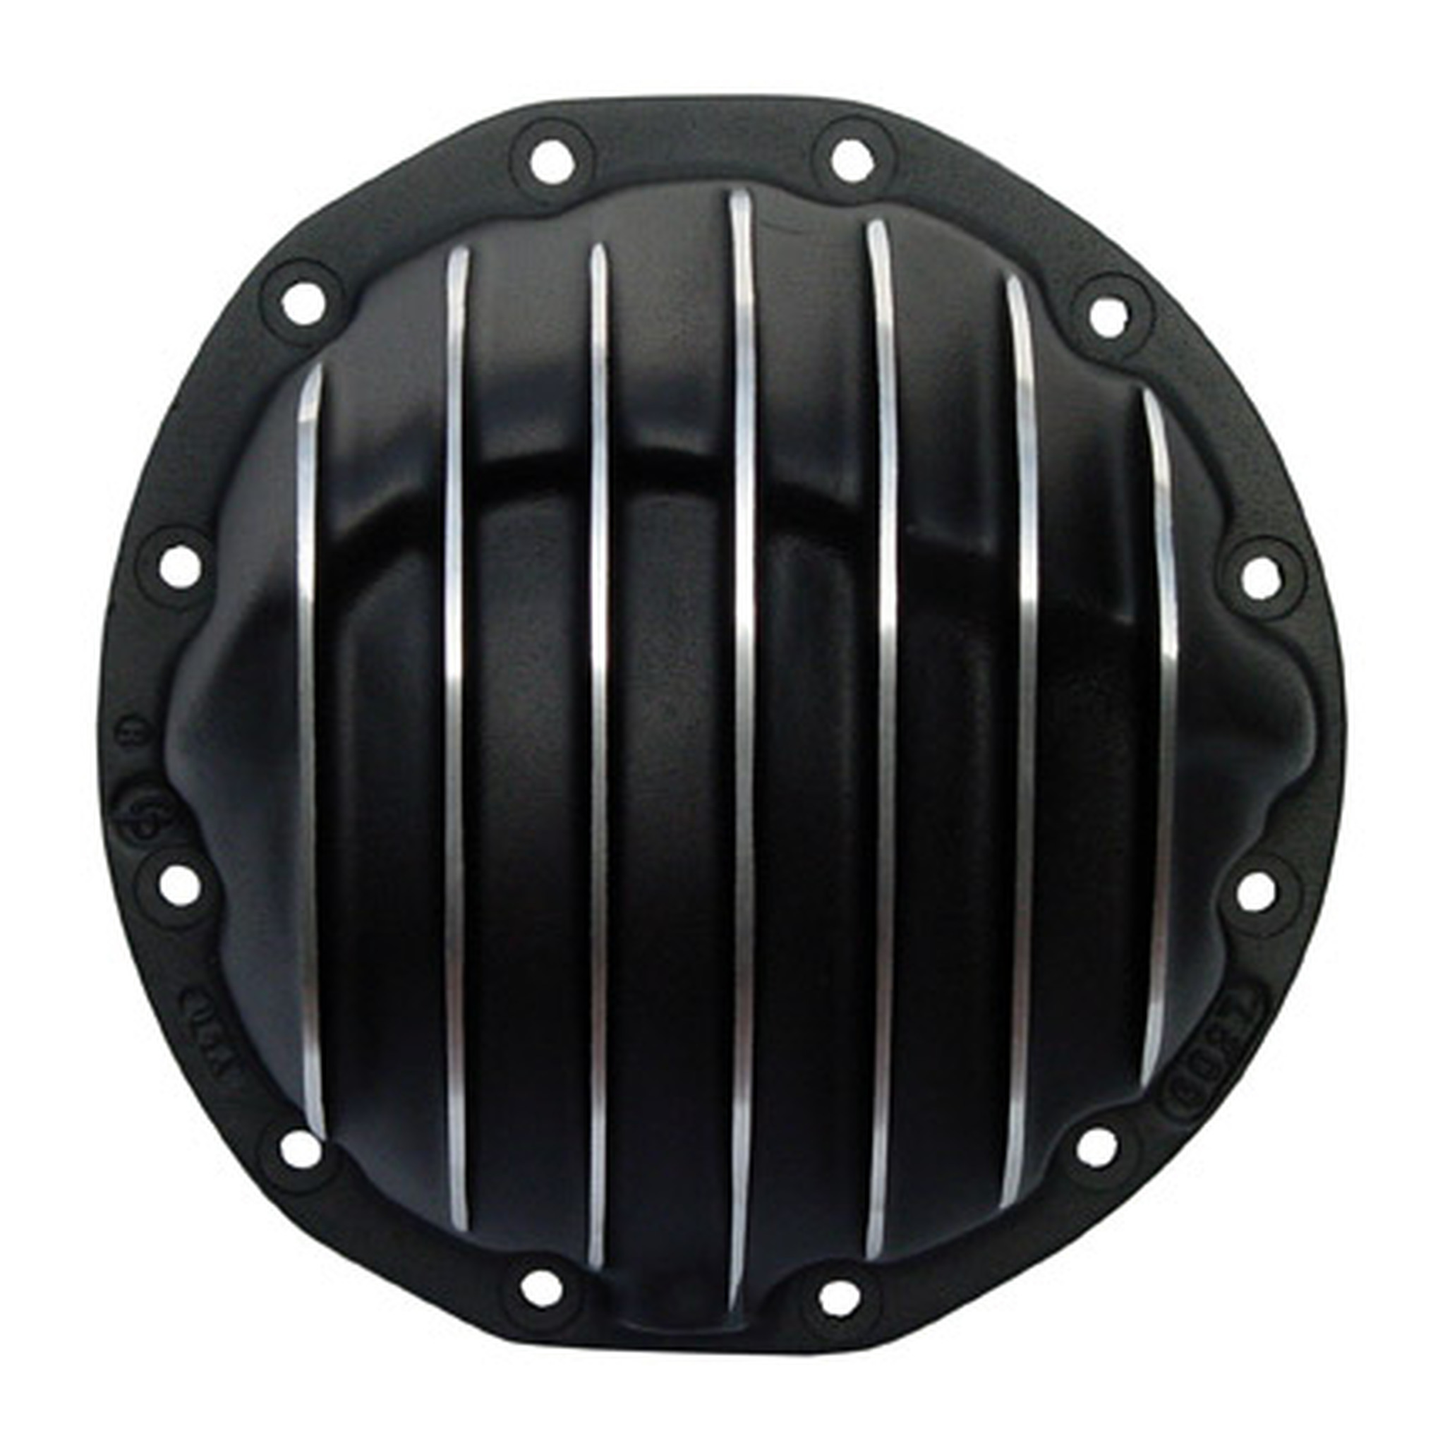 GM 8.875" Car Differential Cover